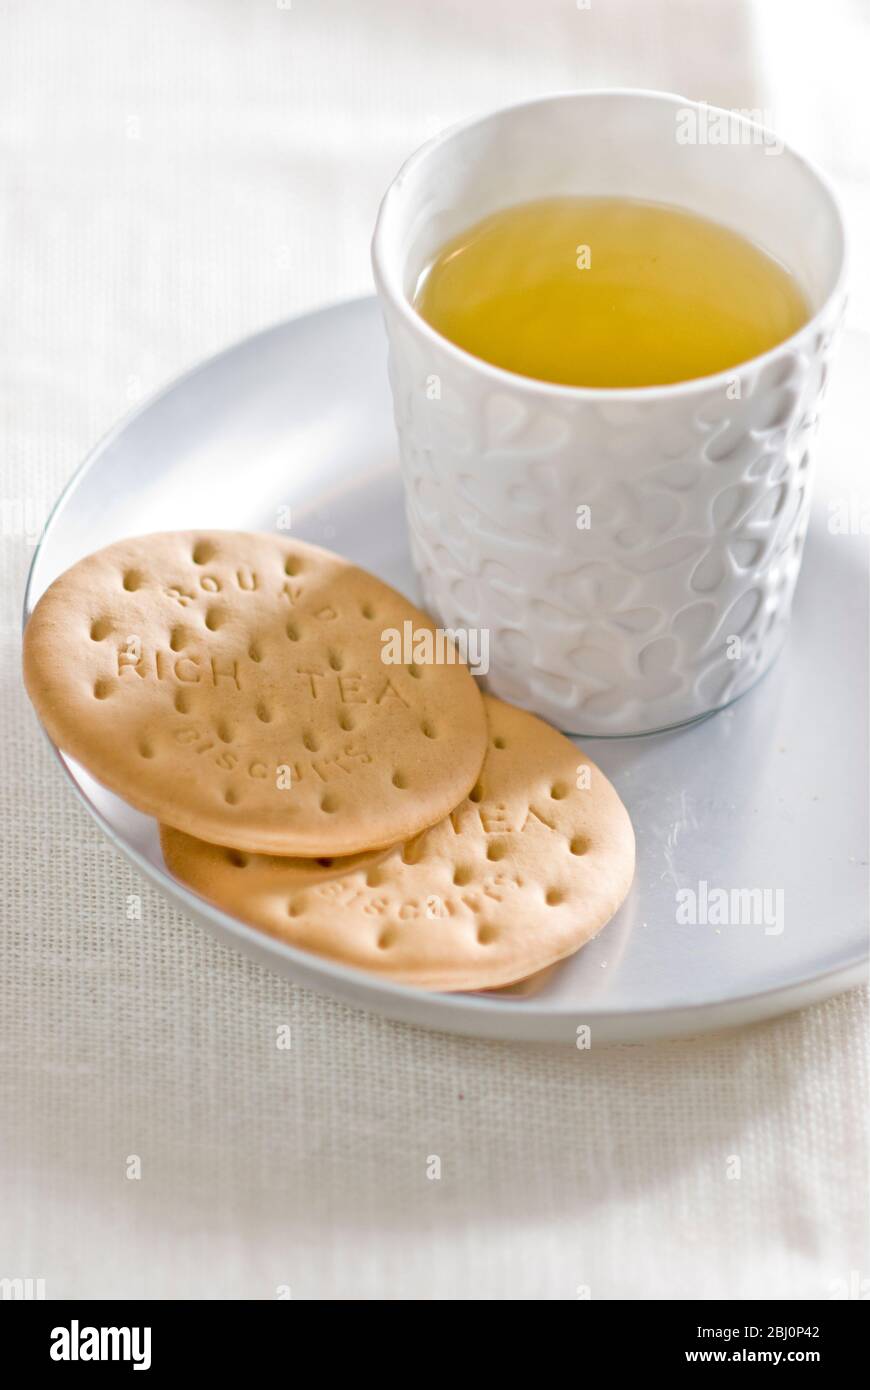 Light refreshment of herbal tea with plain biscuits - Stock Photo